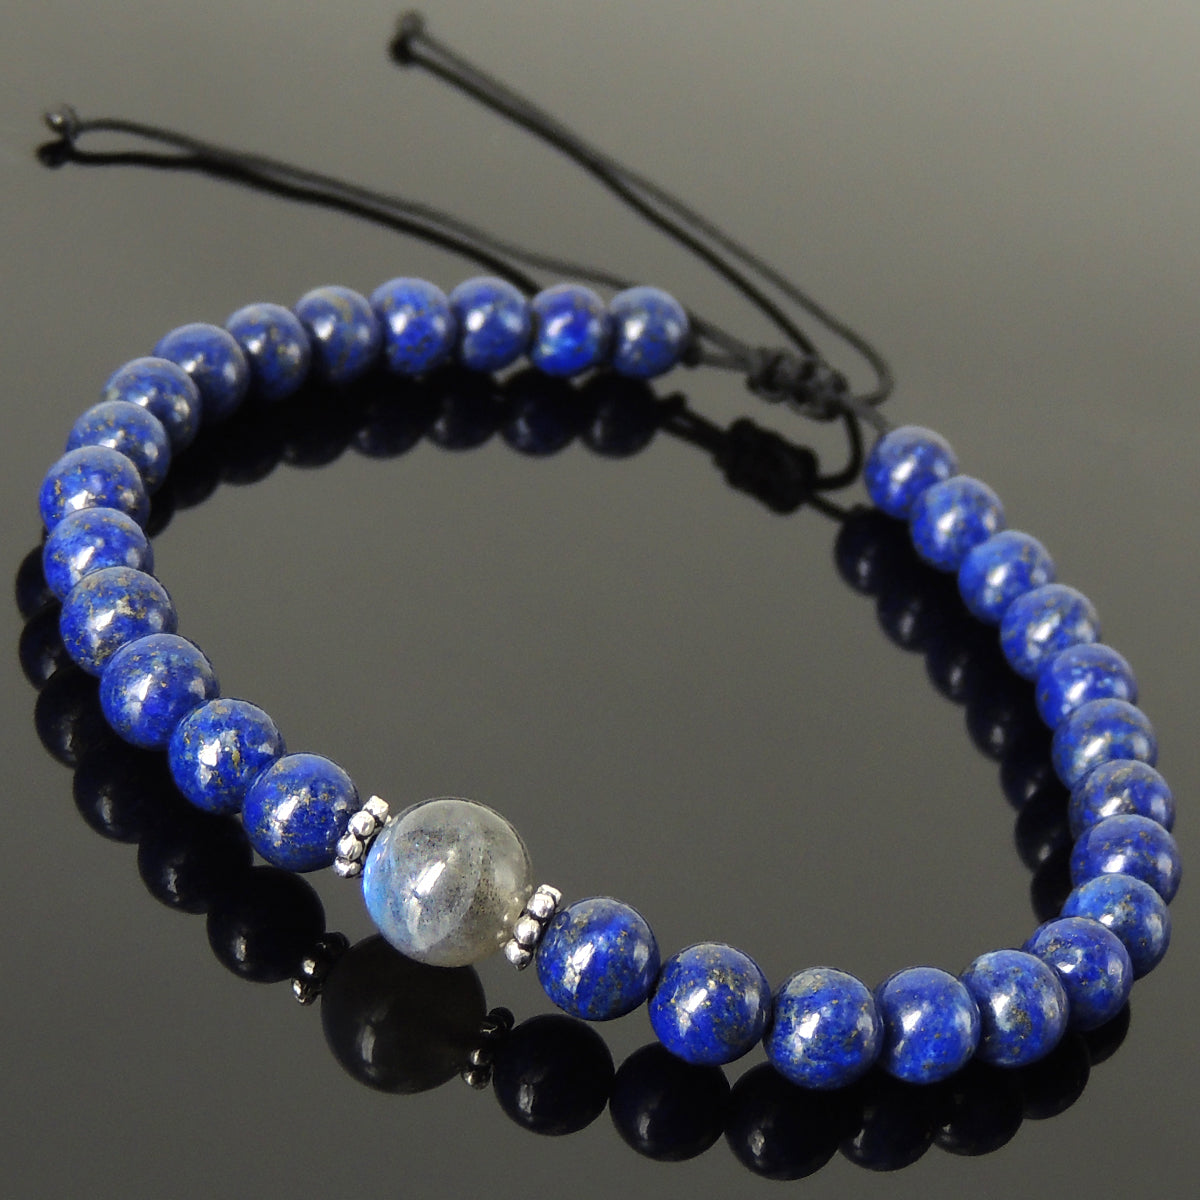 Cleansing Zen Protection Gemstone Jewelry - Men's Women's Handmade Braided Bracelet Casual Wear with Labradorite, Lapis Lazuli, Adjustable Drawstring, S925 Sterling Silver Vintage Spacer Beads BR1744